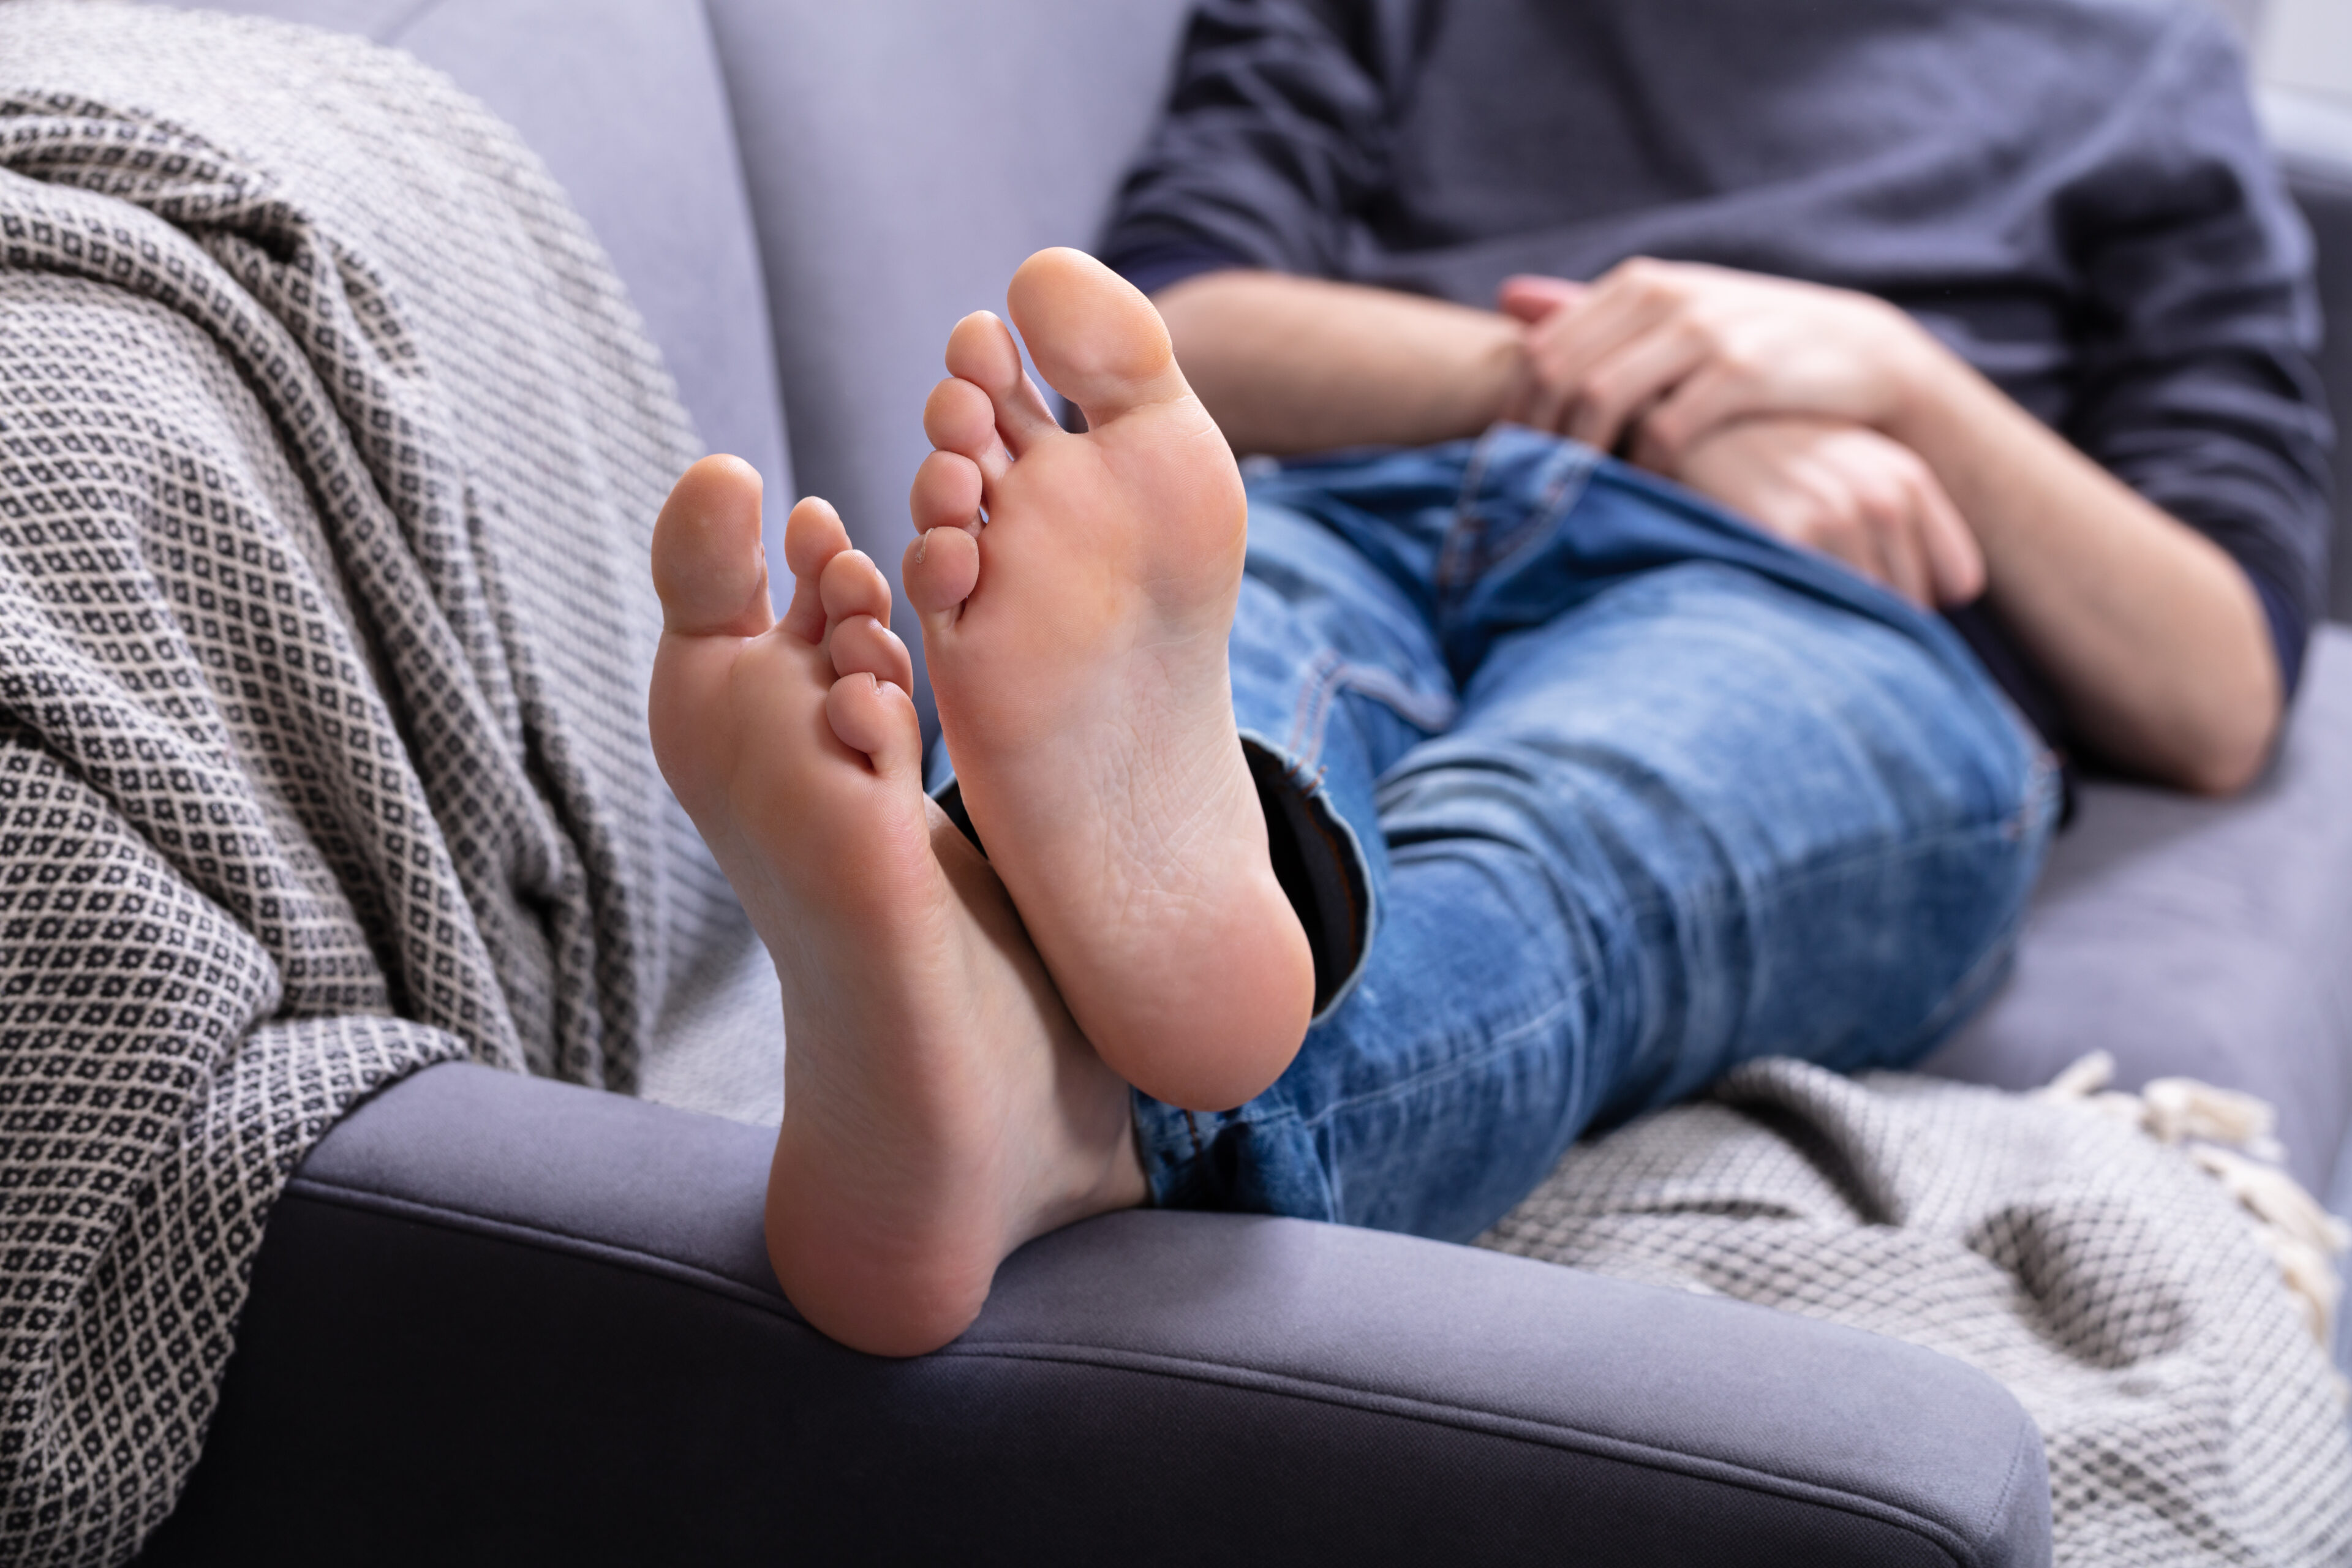 What are the best ways to relieve foot pain?